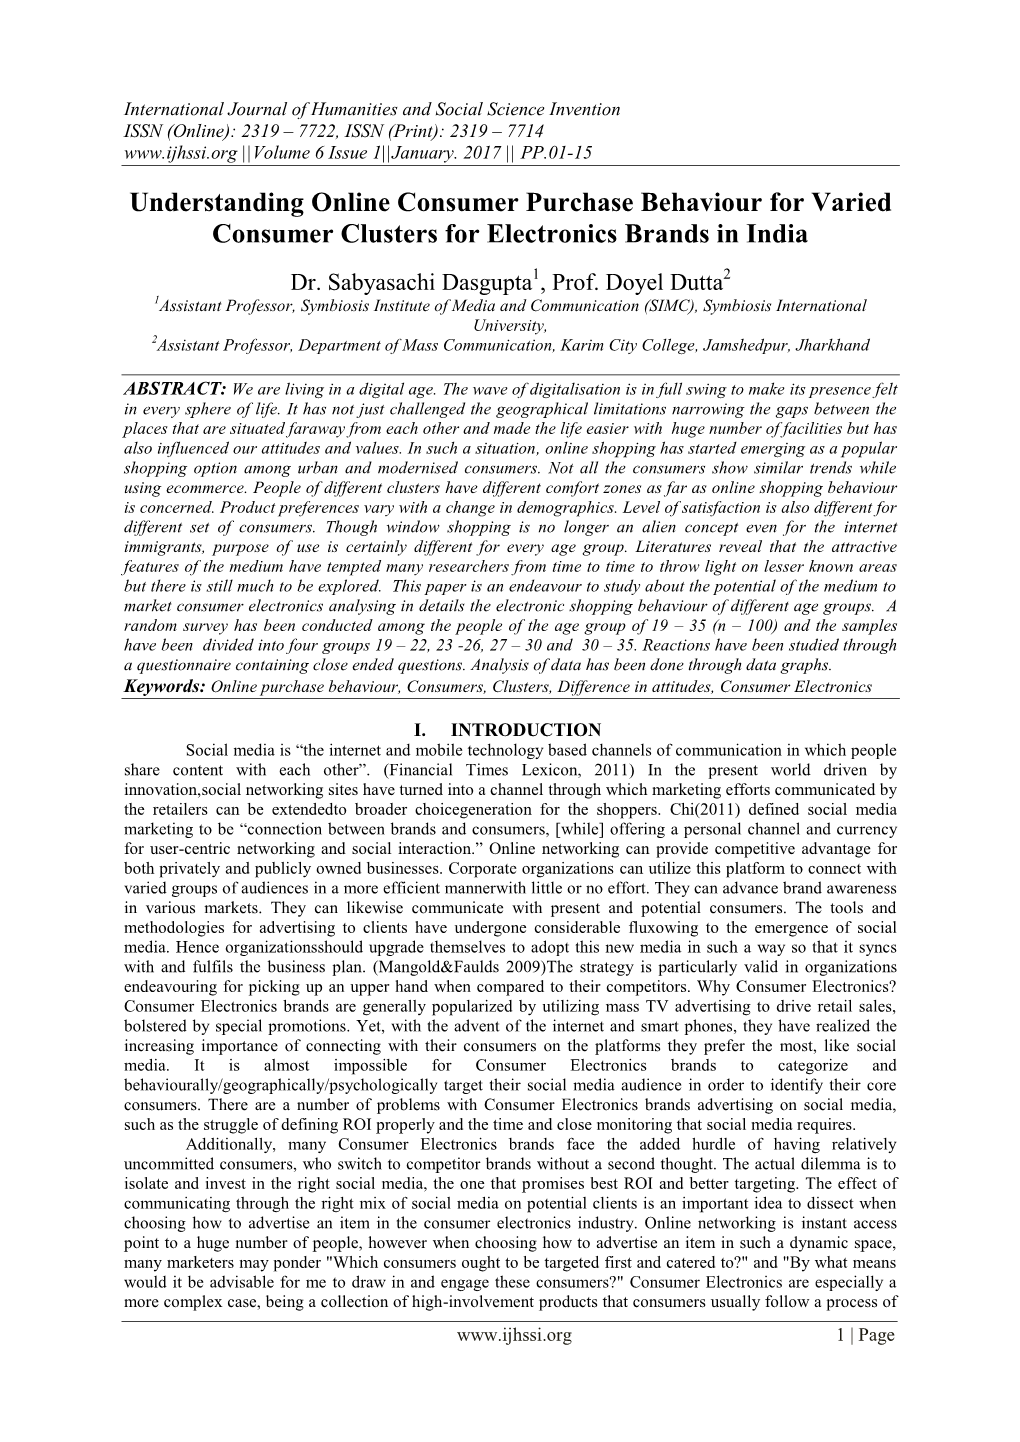 Understanding Online Consumer Purchase Behaviour for Varied Consumer Clusters for Electronics Brands in India